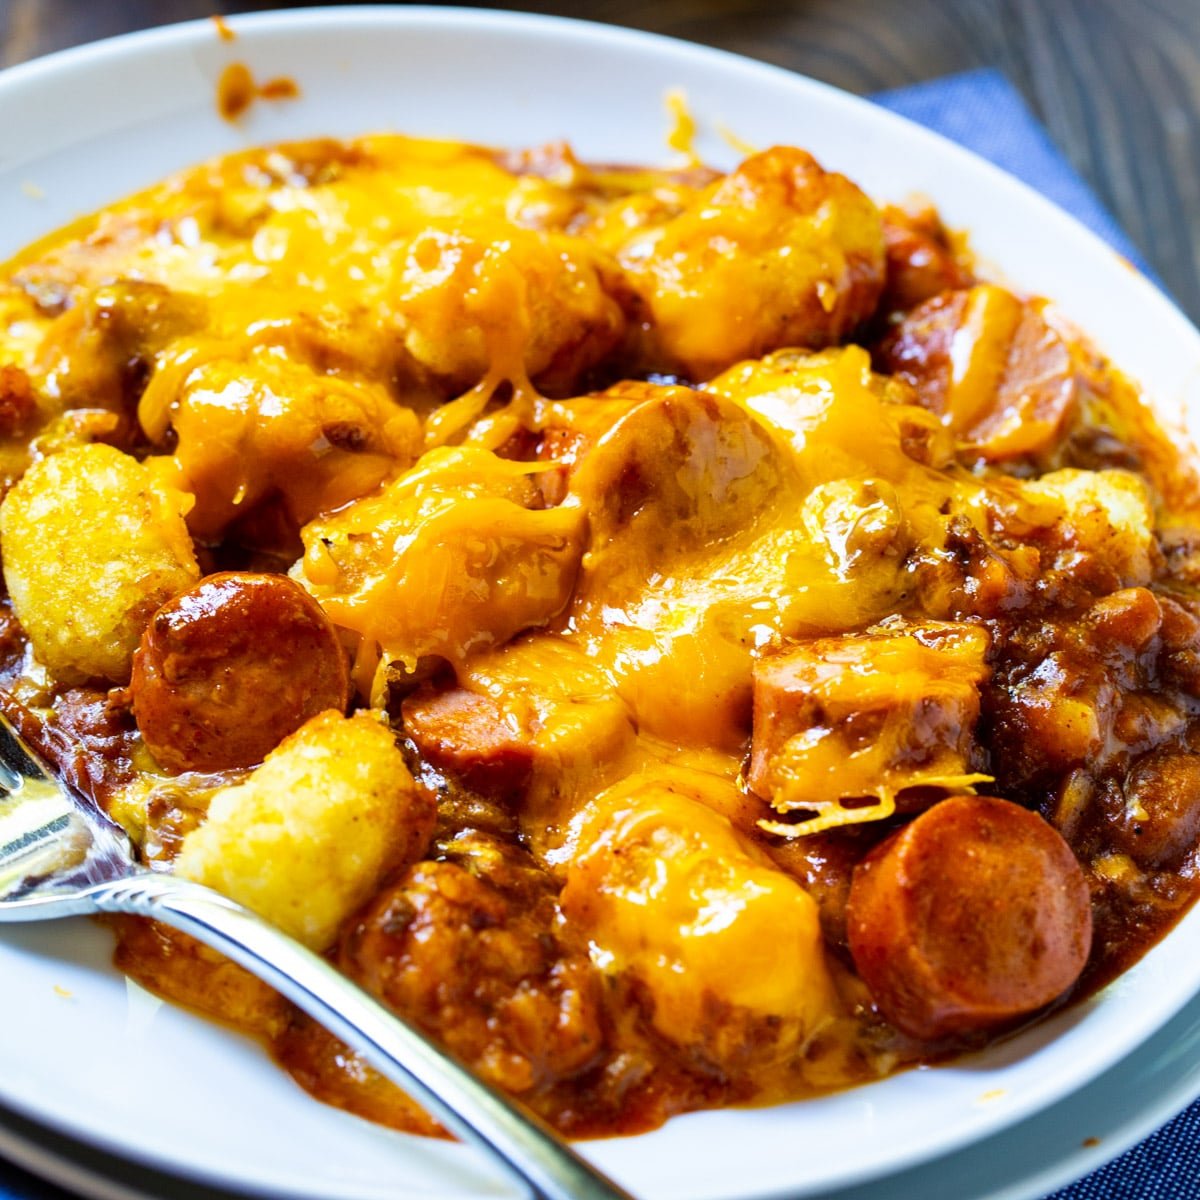 Cheesy Hot Dog Tater Tot Casserole dished up on a plate.